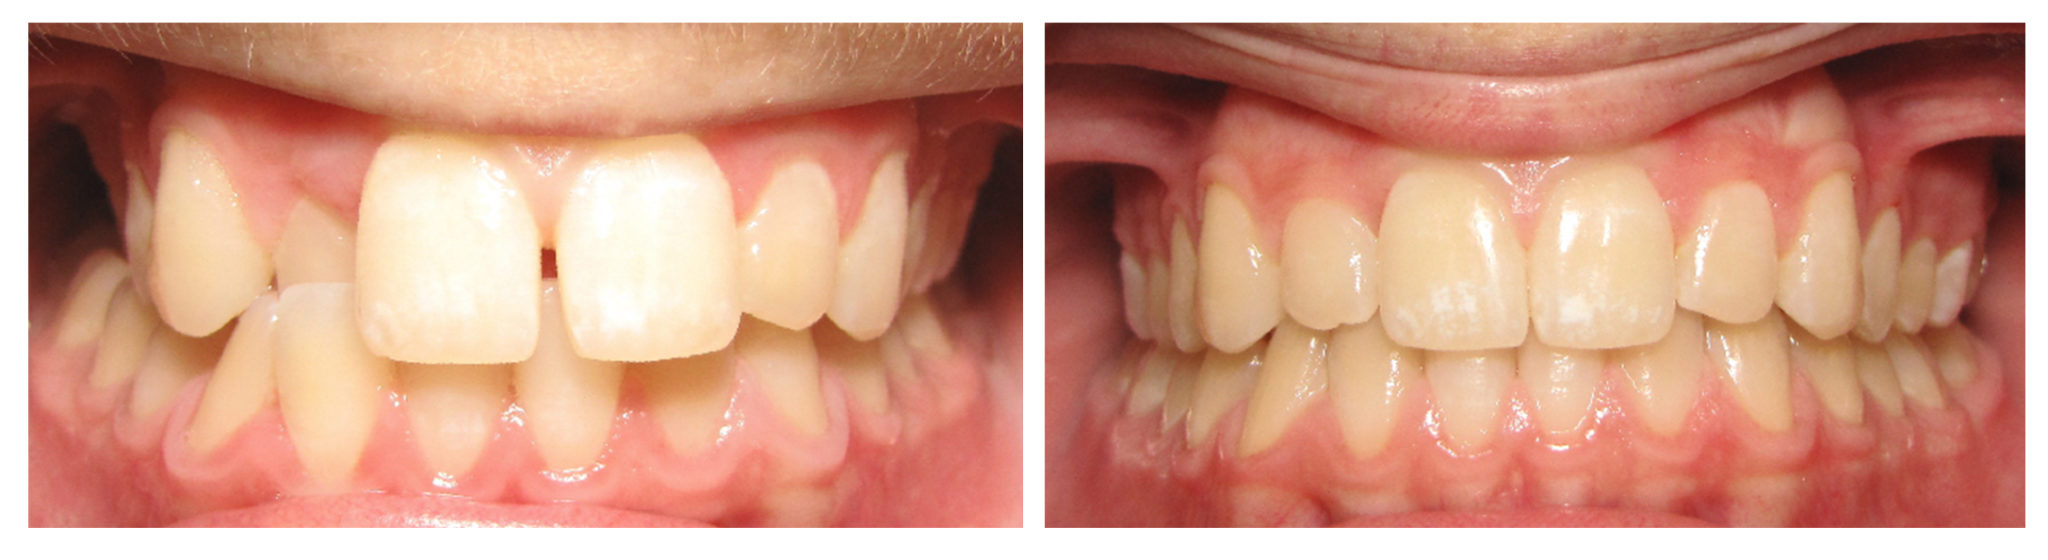 Before and After view of teeth fixed with invisalign